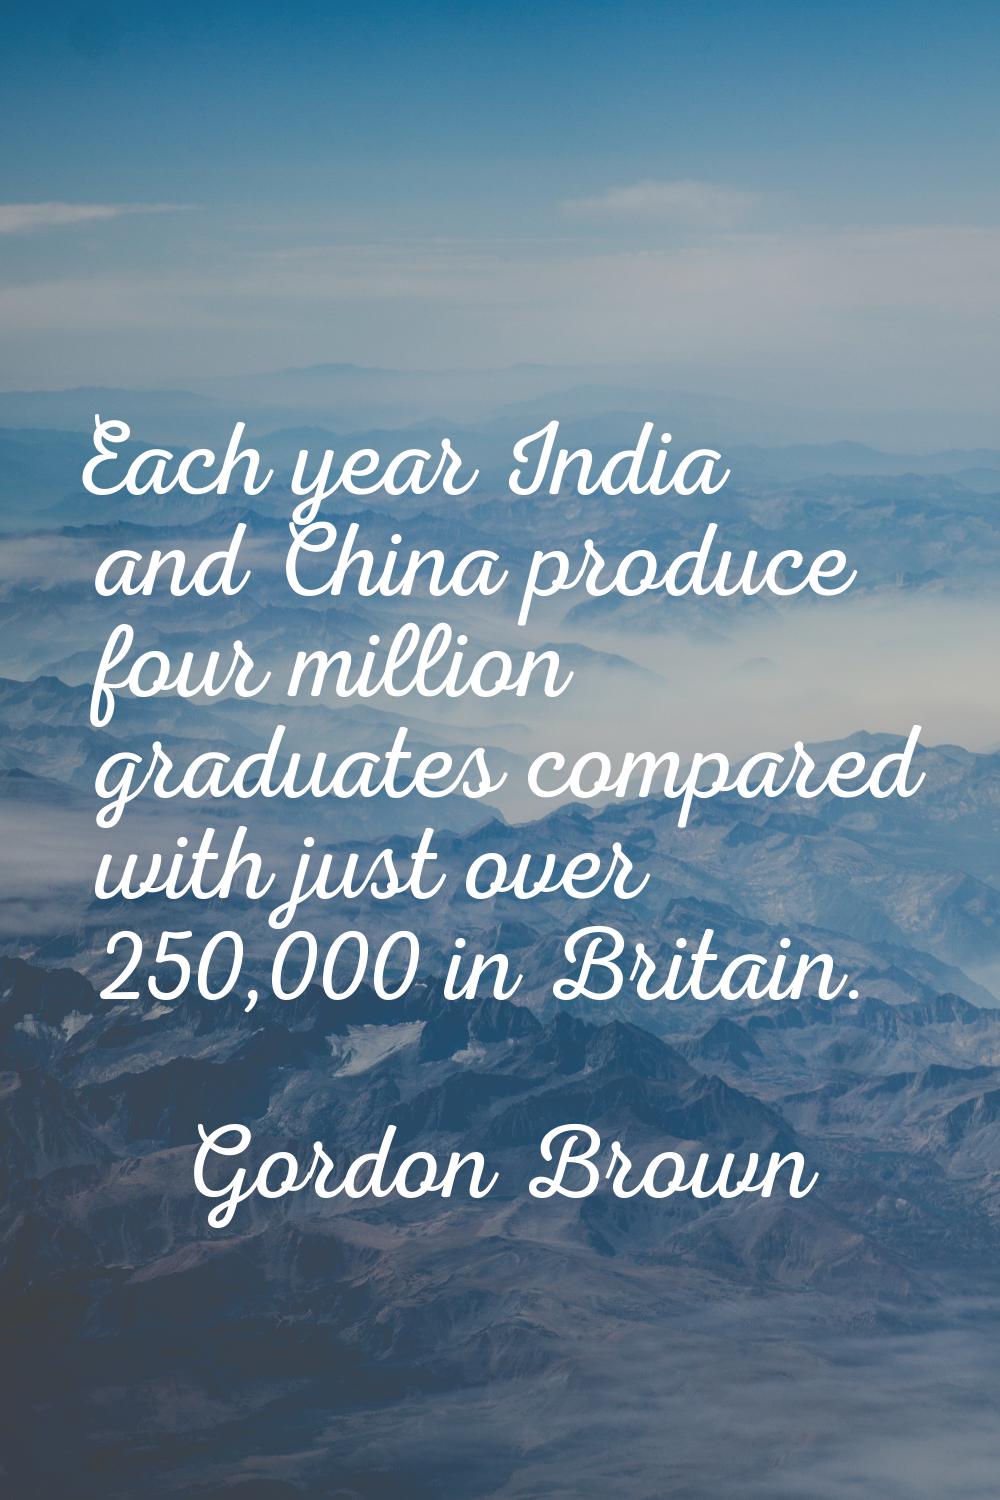 Each year India and China produce four million graduates compared with just over 250,000 in Britain